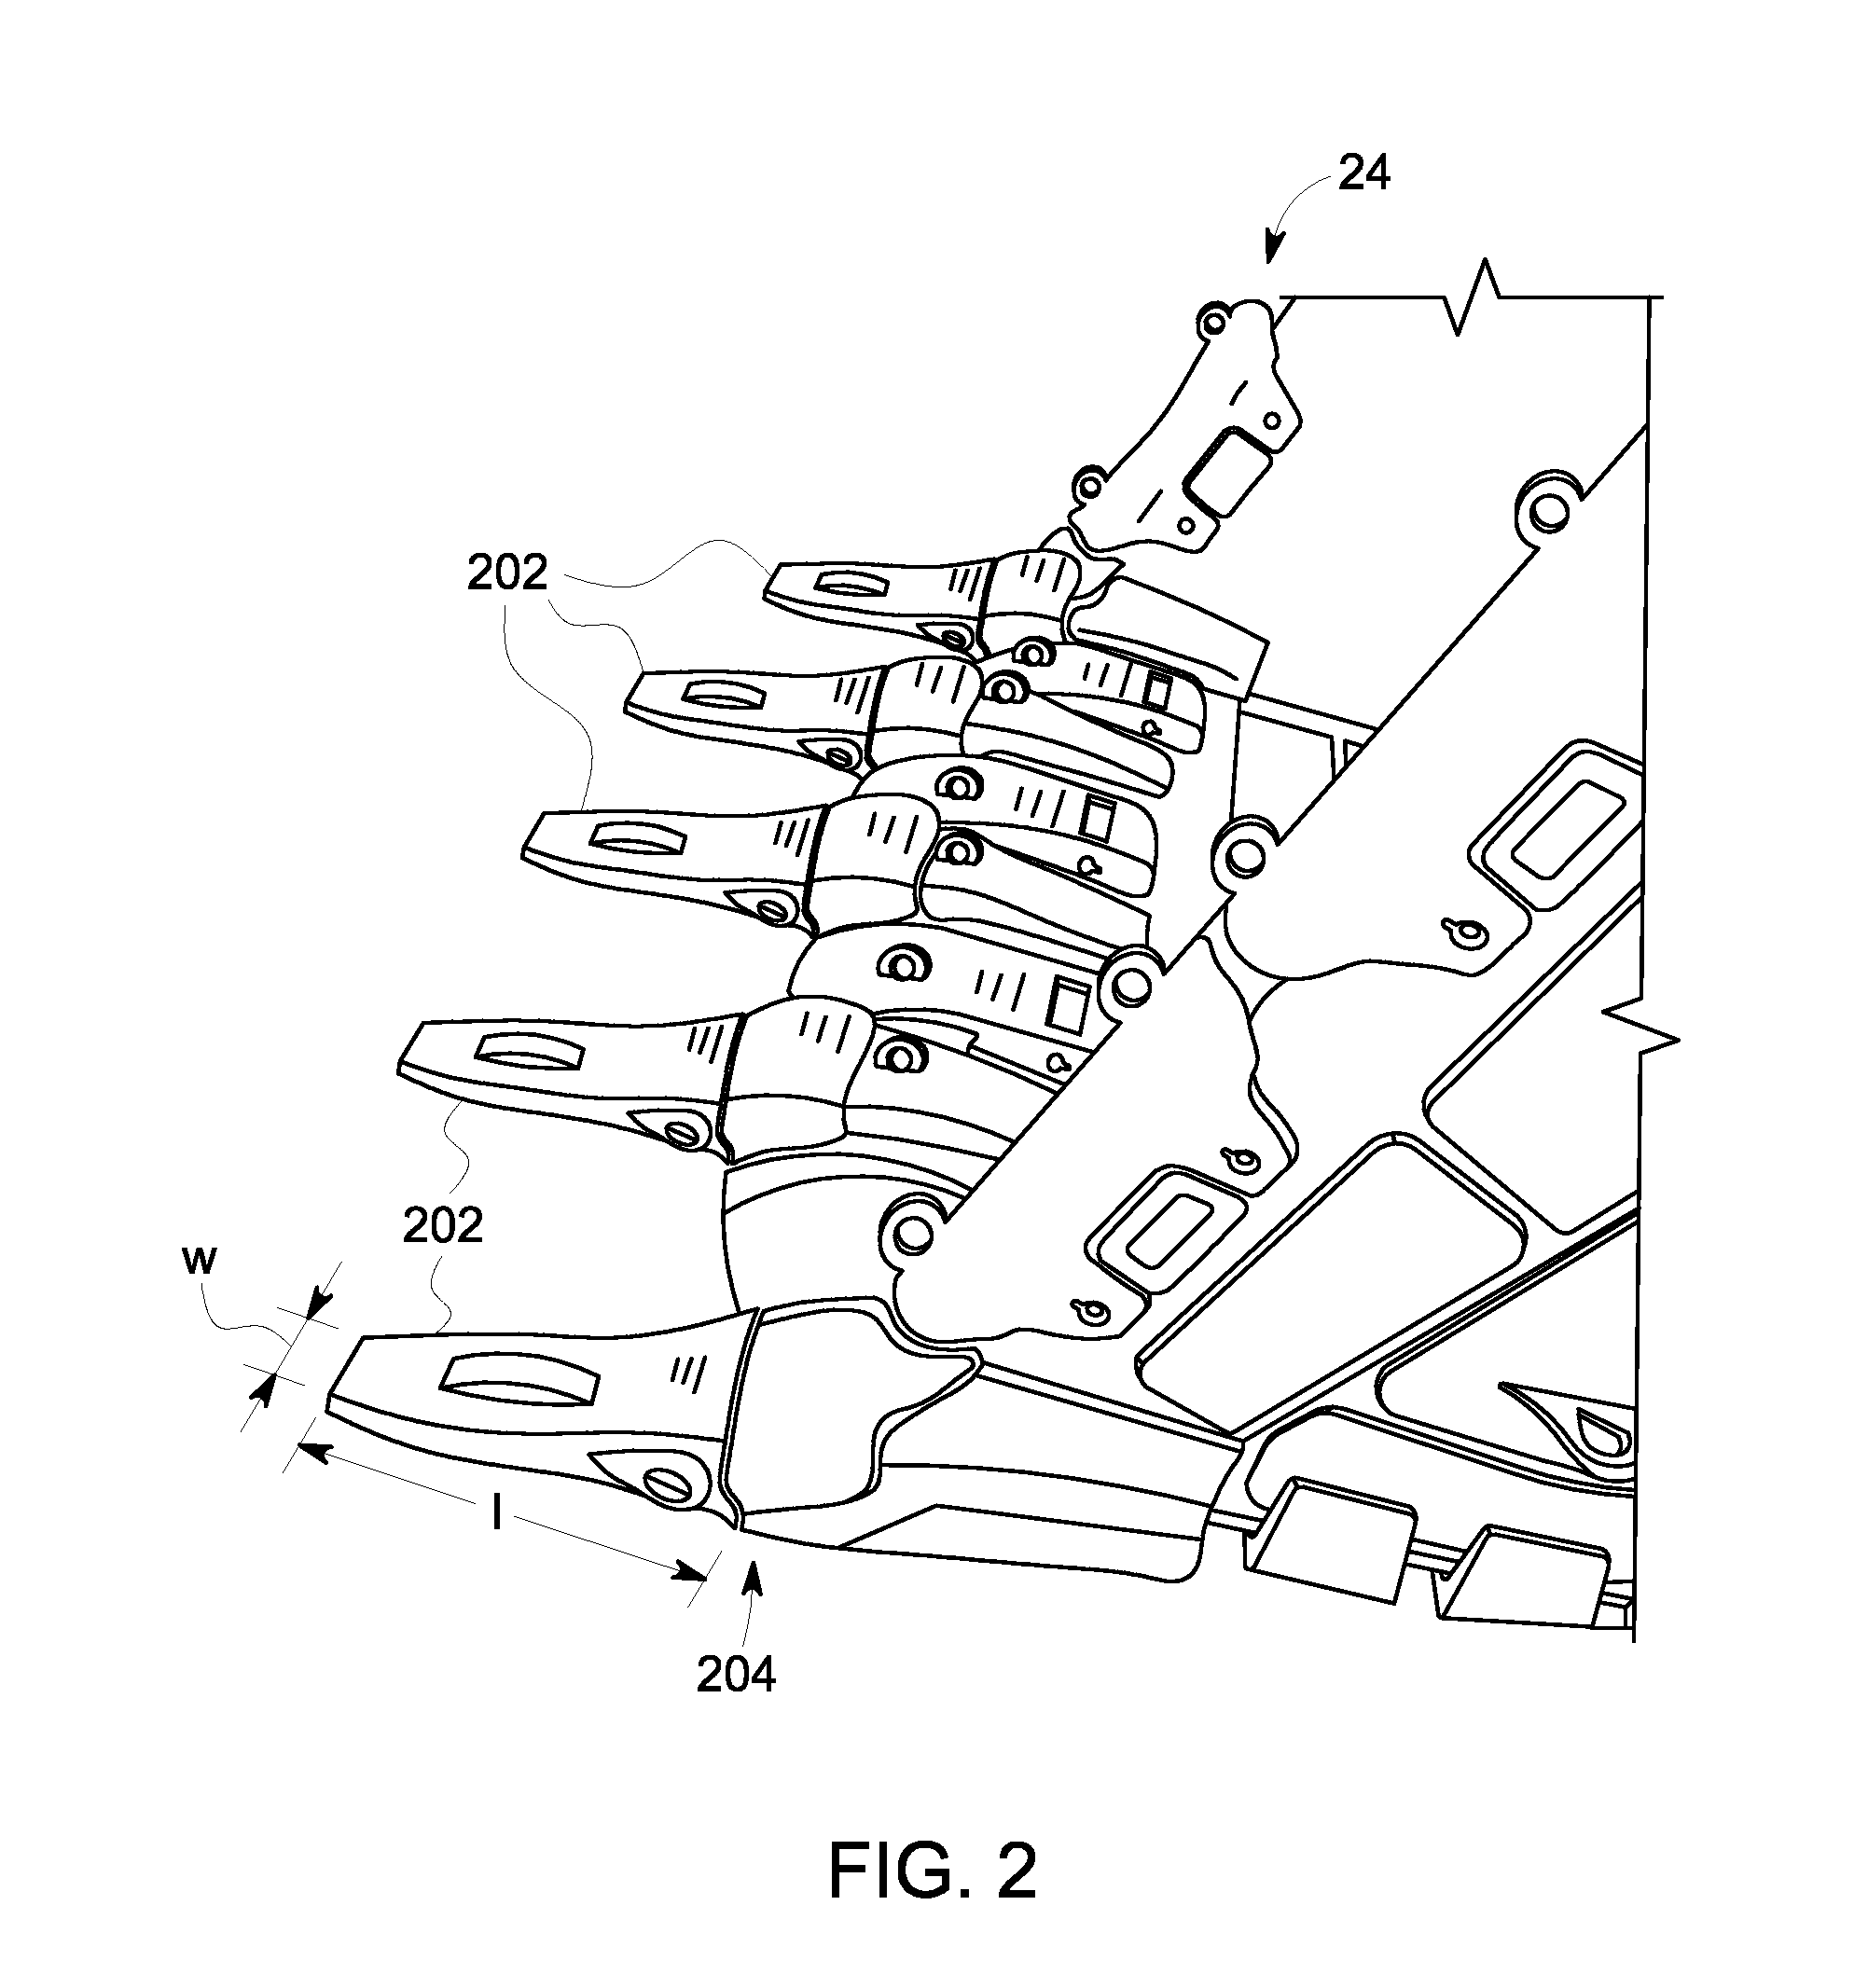 Method and system for detecting a damaged component of a machine